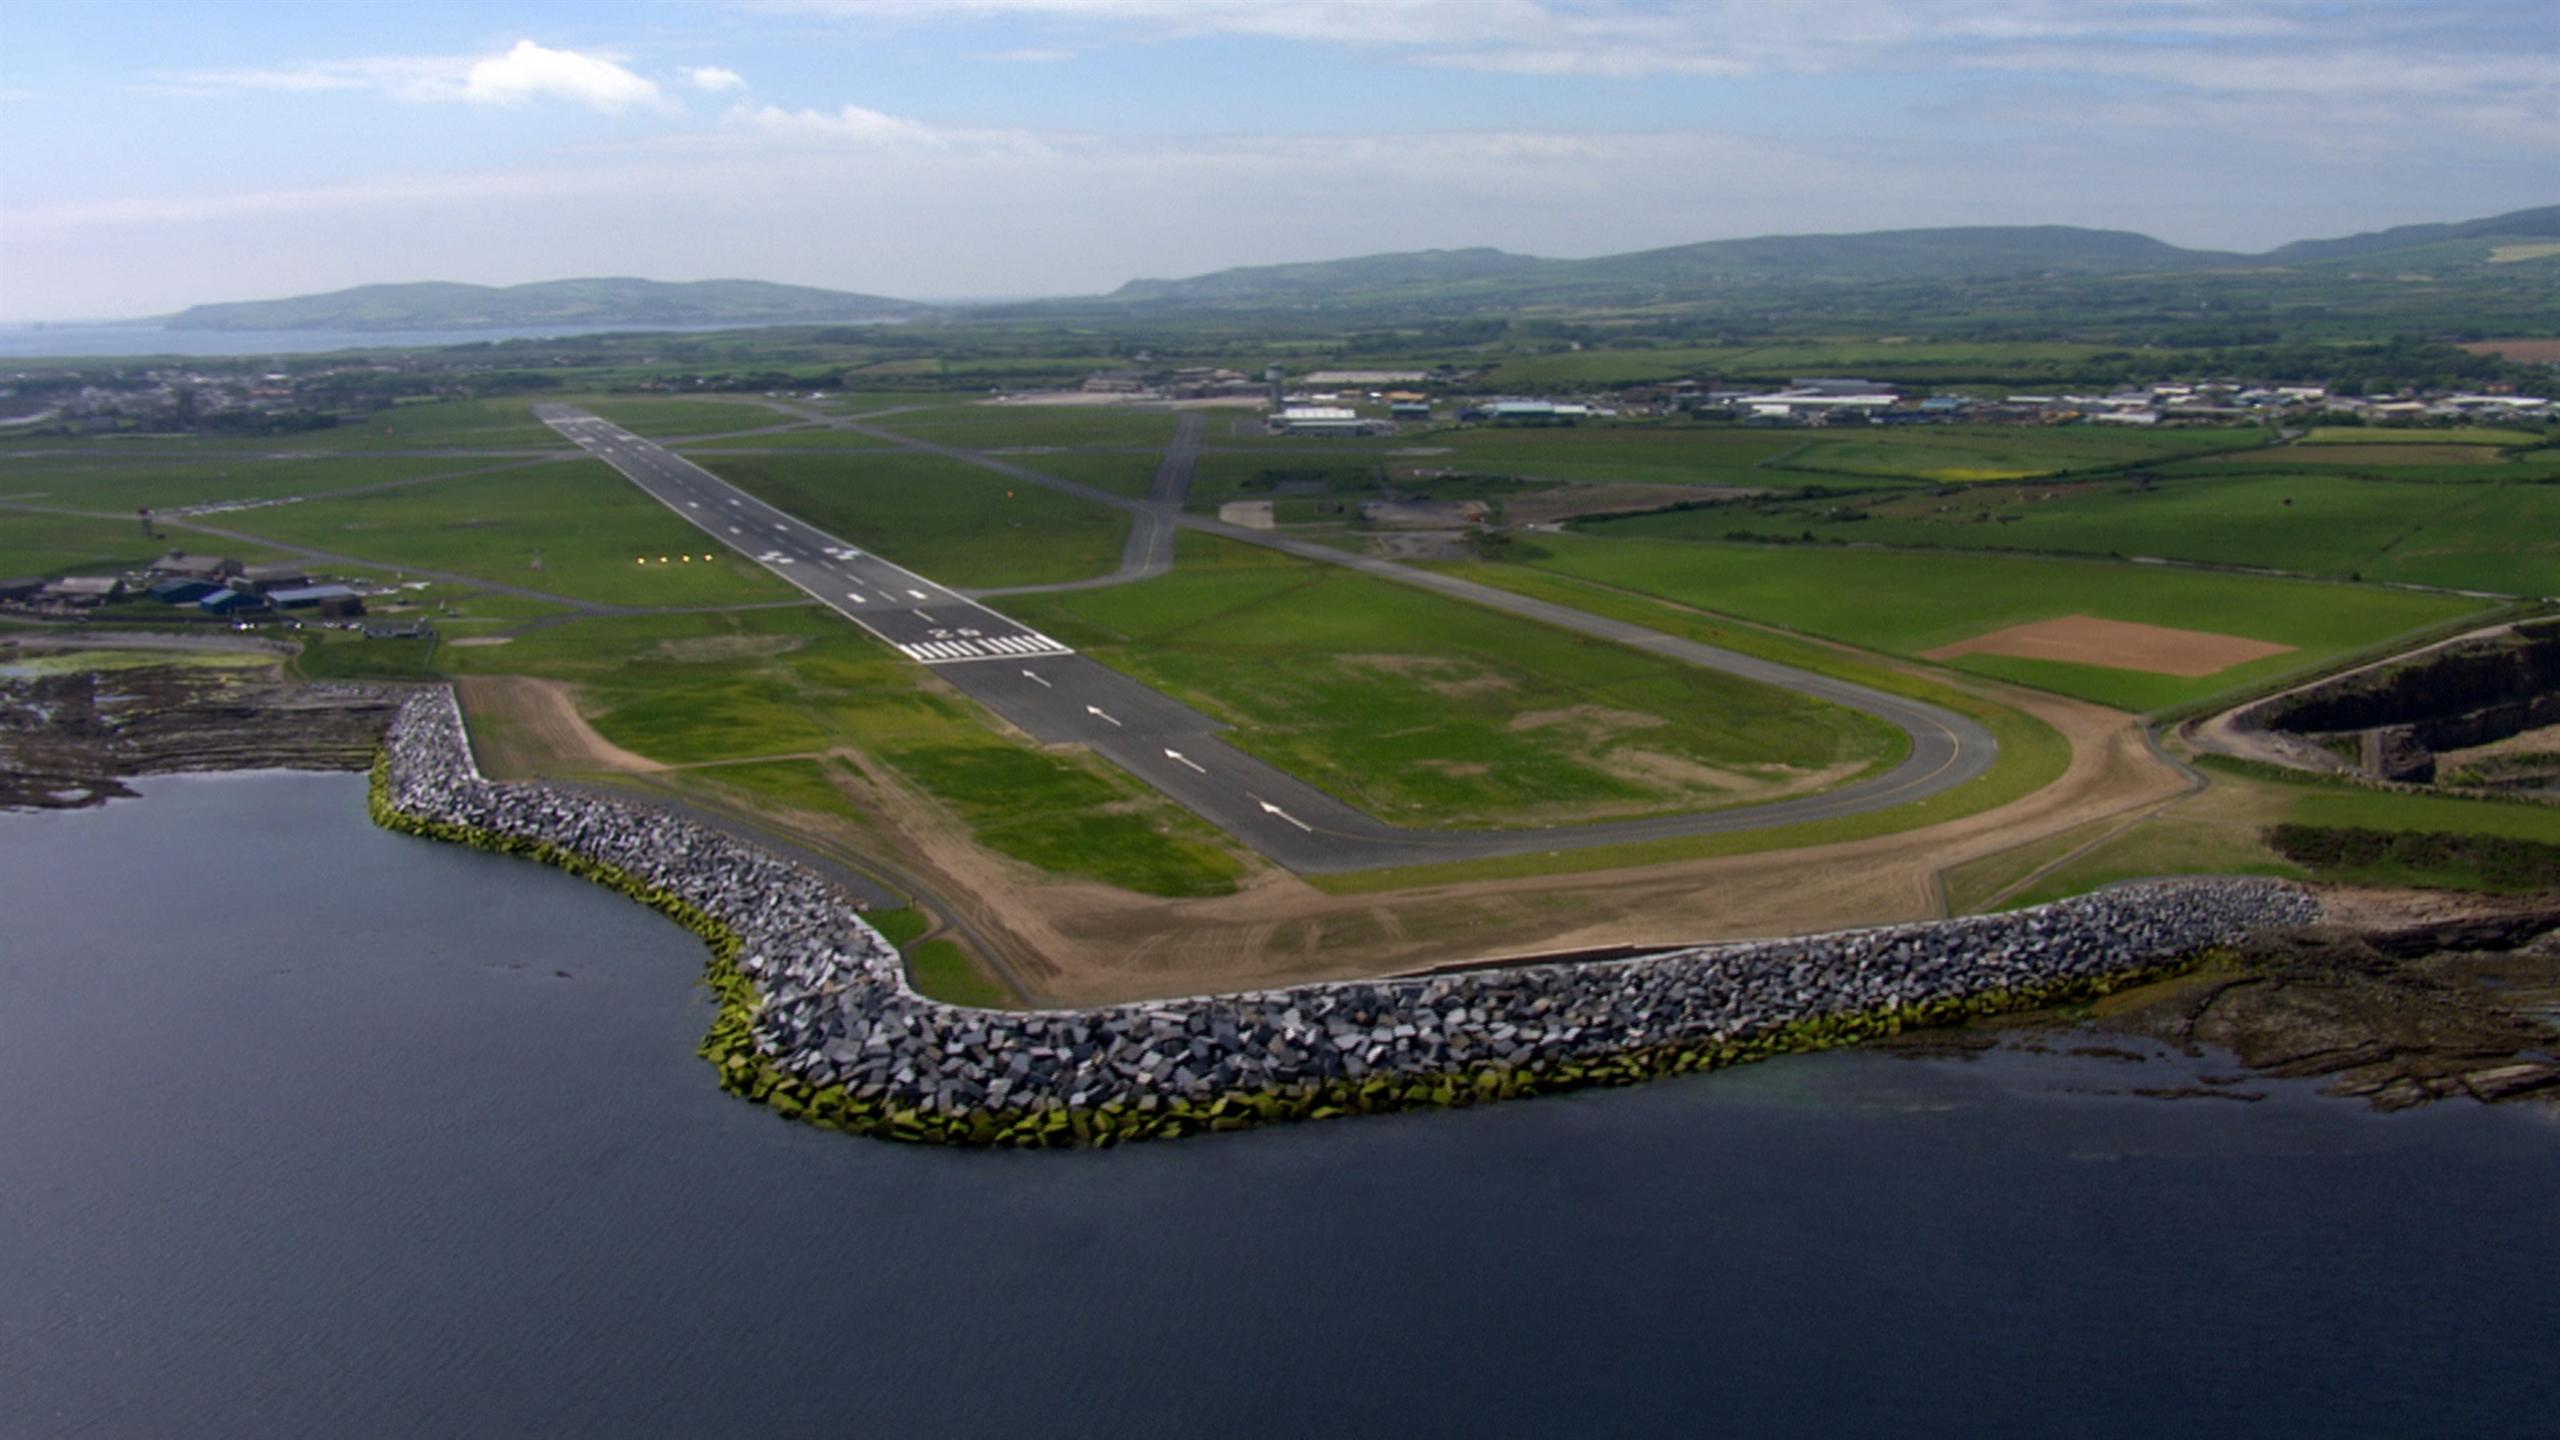 View of the completed Isle of Man runway extension with armoured revetment